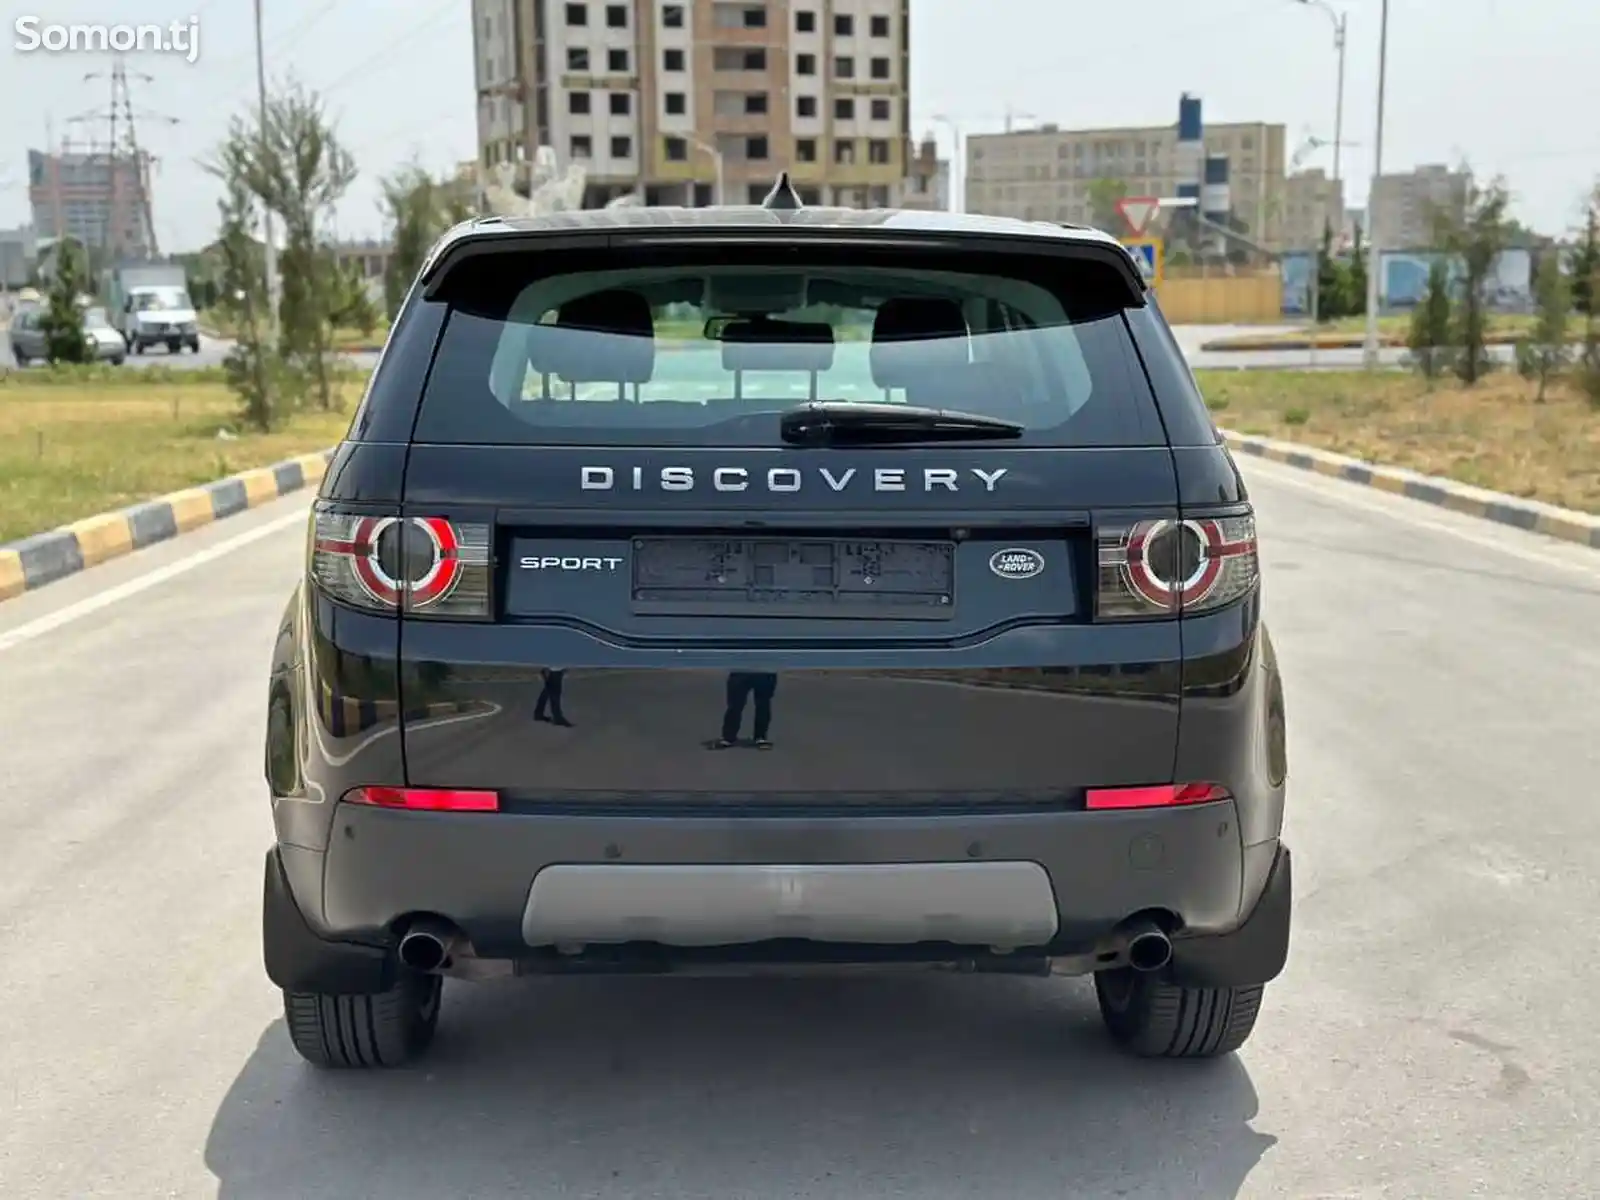 Land Rover Discovery, 2018-4